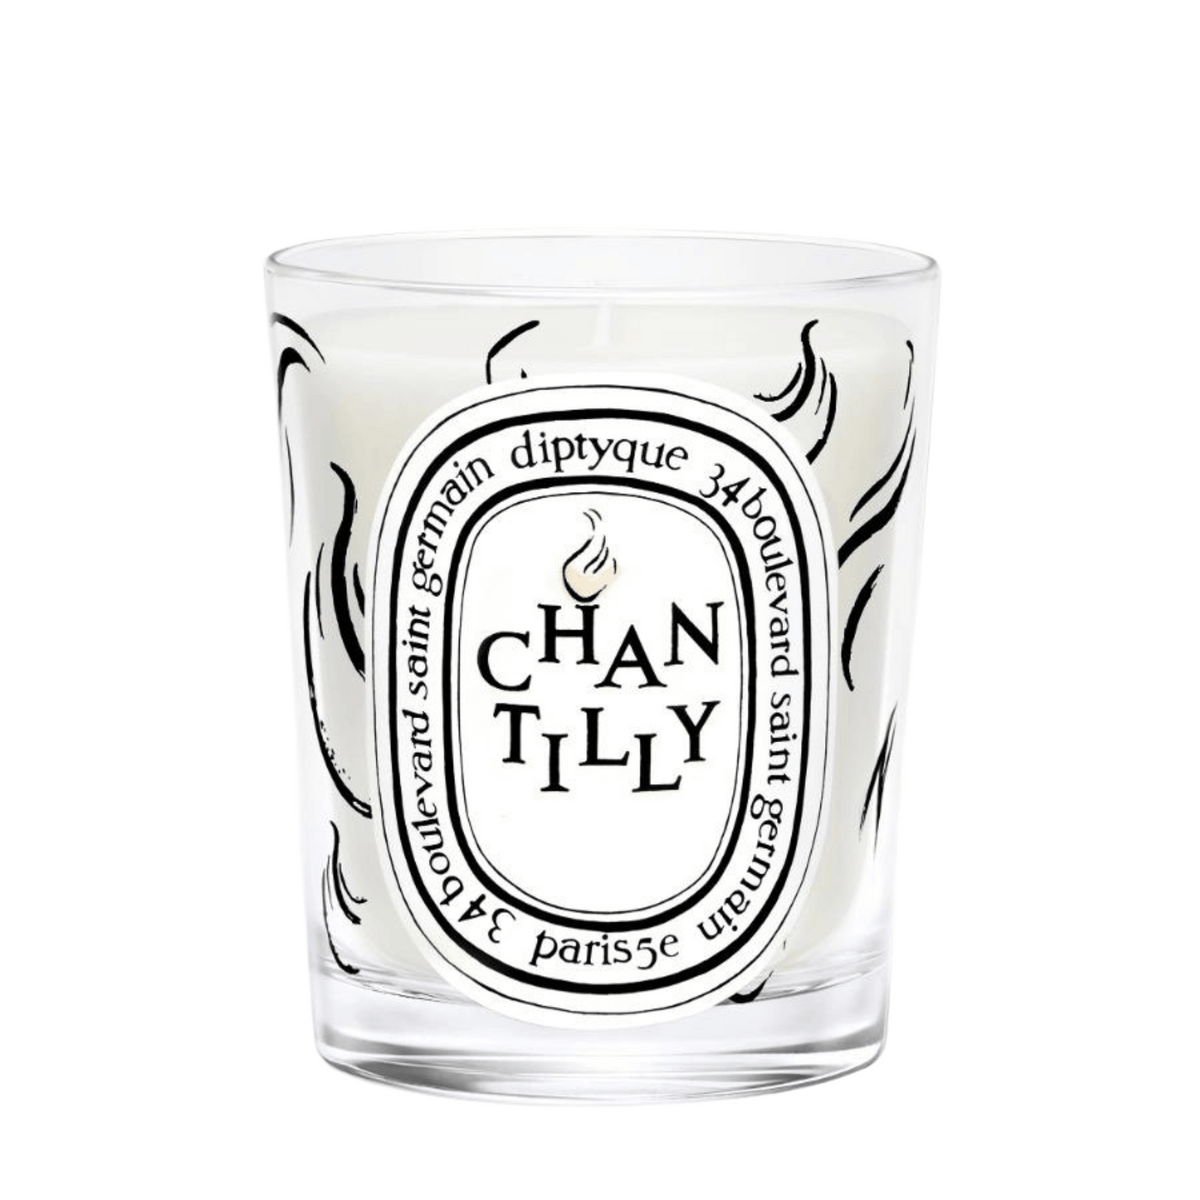 Primary Image of Chantilly Candle